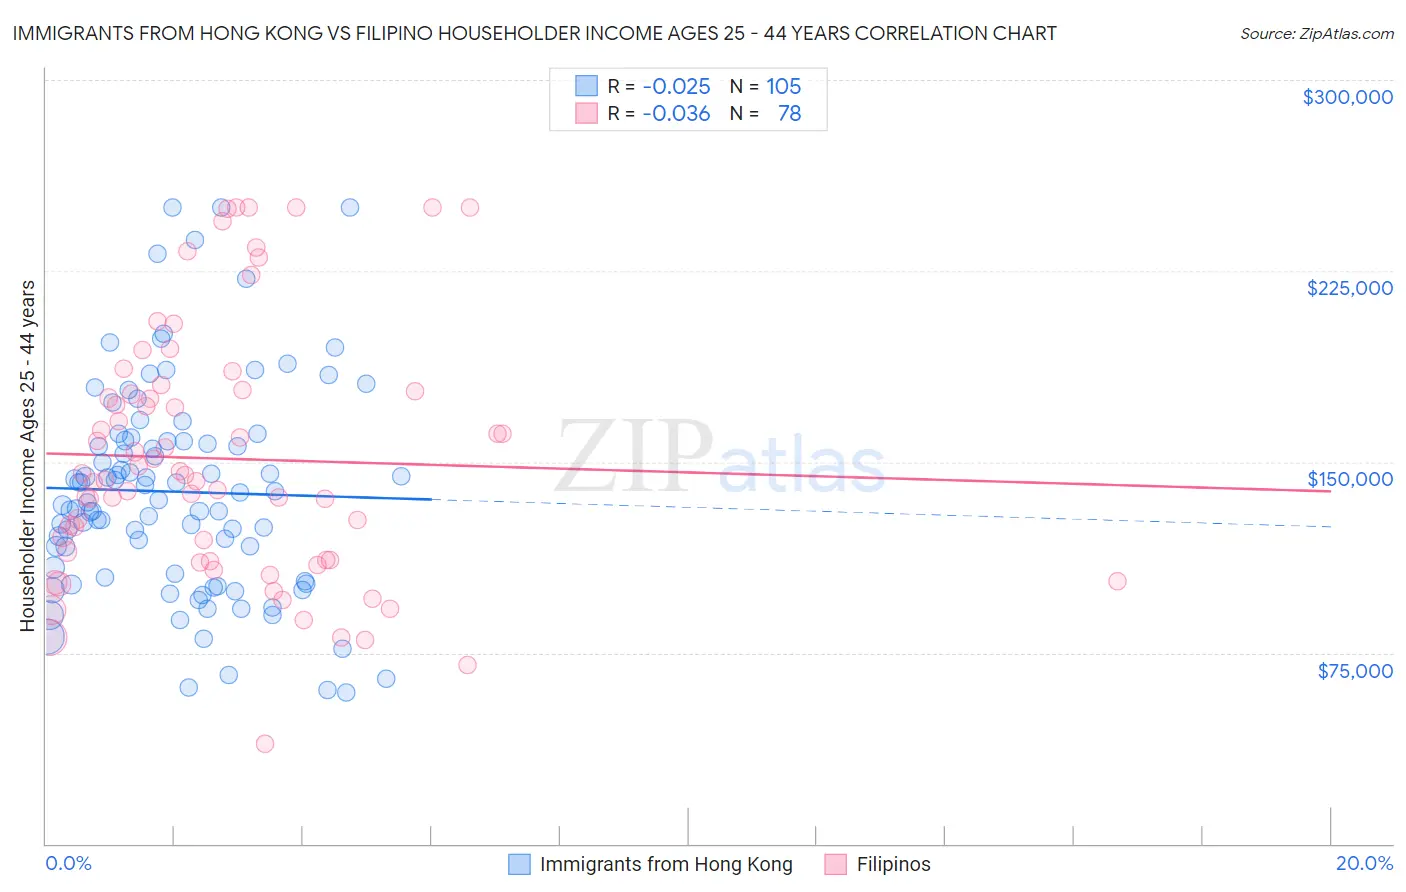 Immigrants from Hong Kong vs Filipino Householder Income Ages 25 - 44 years